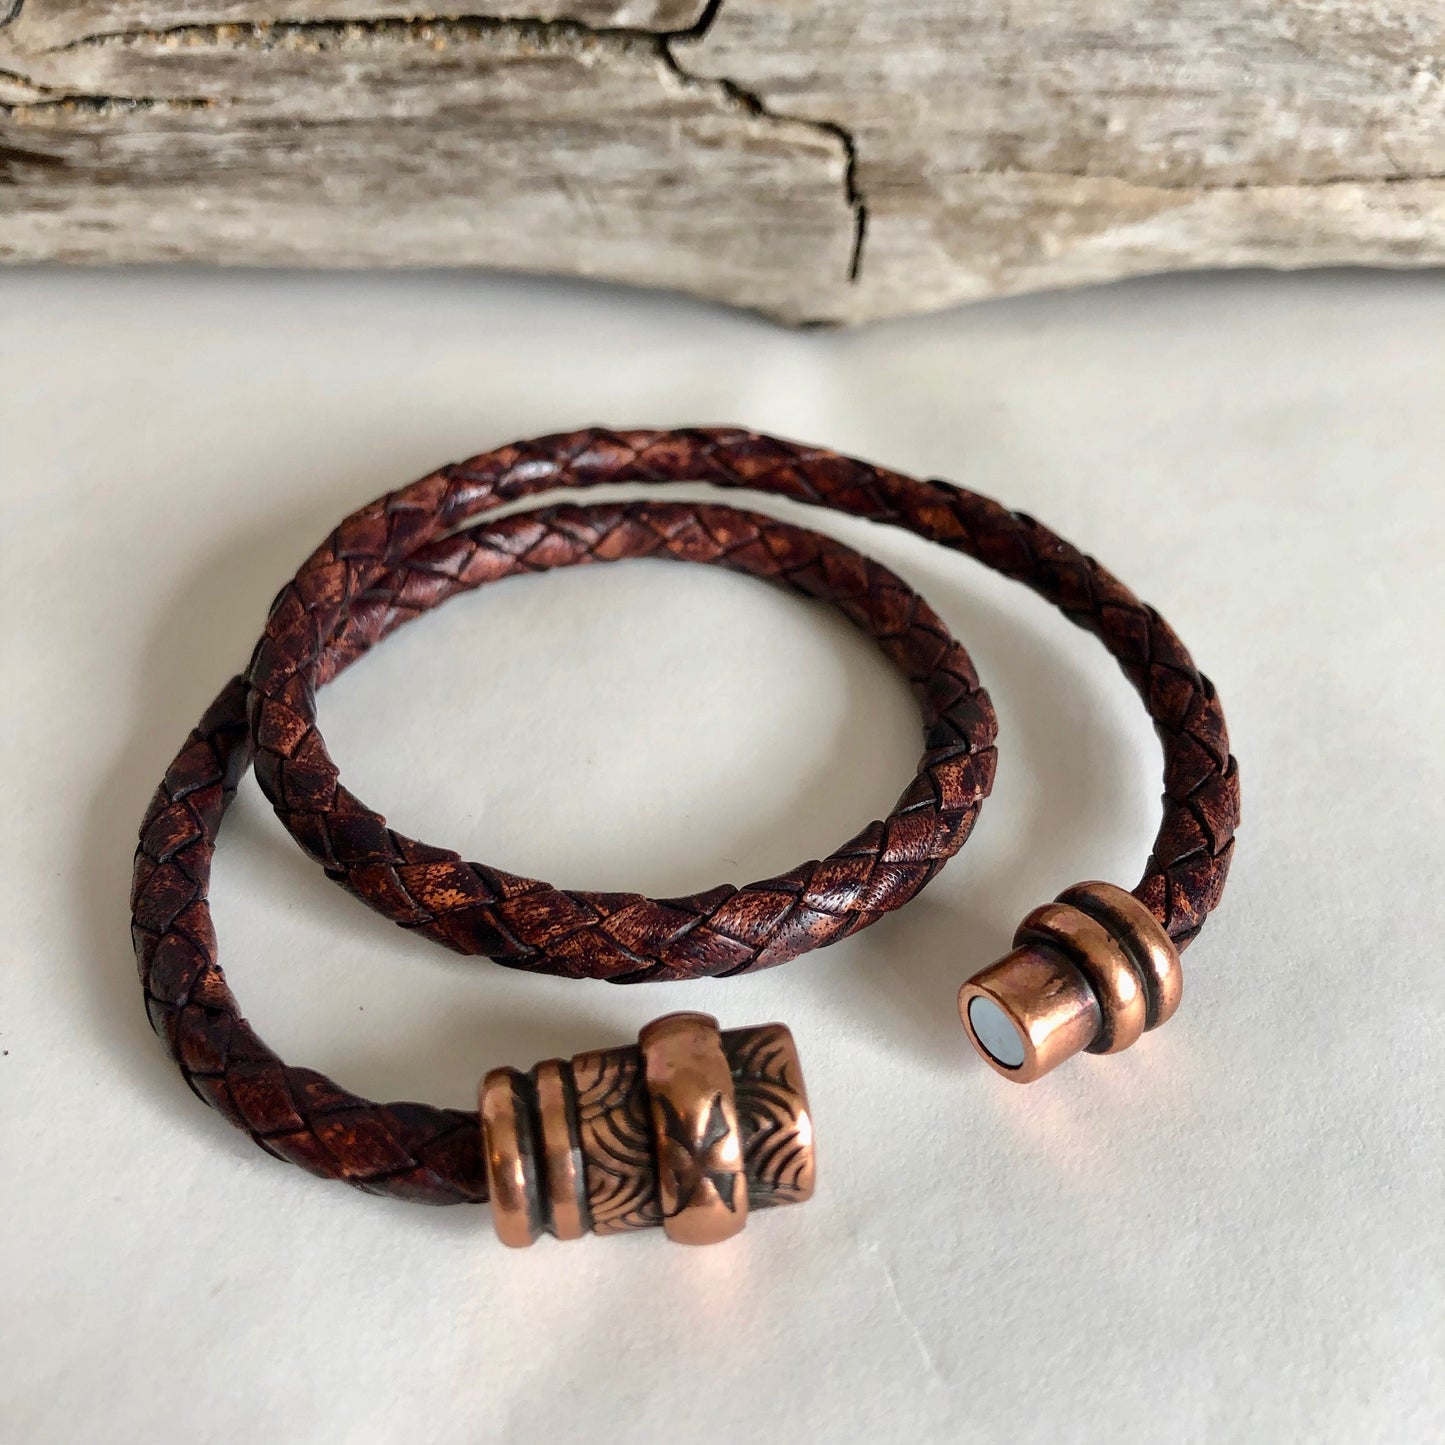 Leather bracelet finished with a stunning copper magnetic clasp.